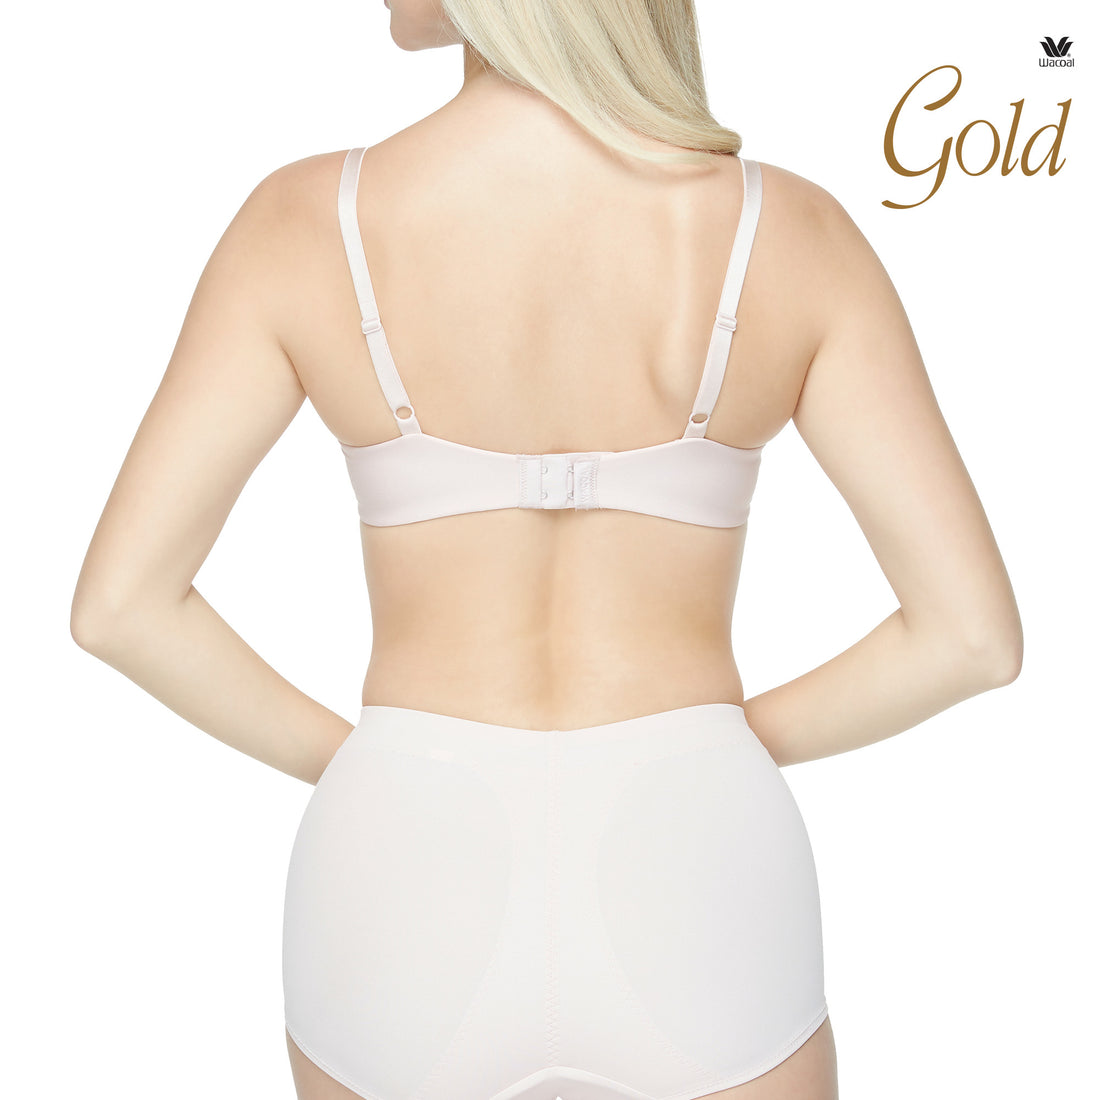 WACOAL bra 46DD. Beautiful Lace Softcup + Underwired #855186 Wacoal Comfort  NEW - Helia Beer Co